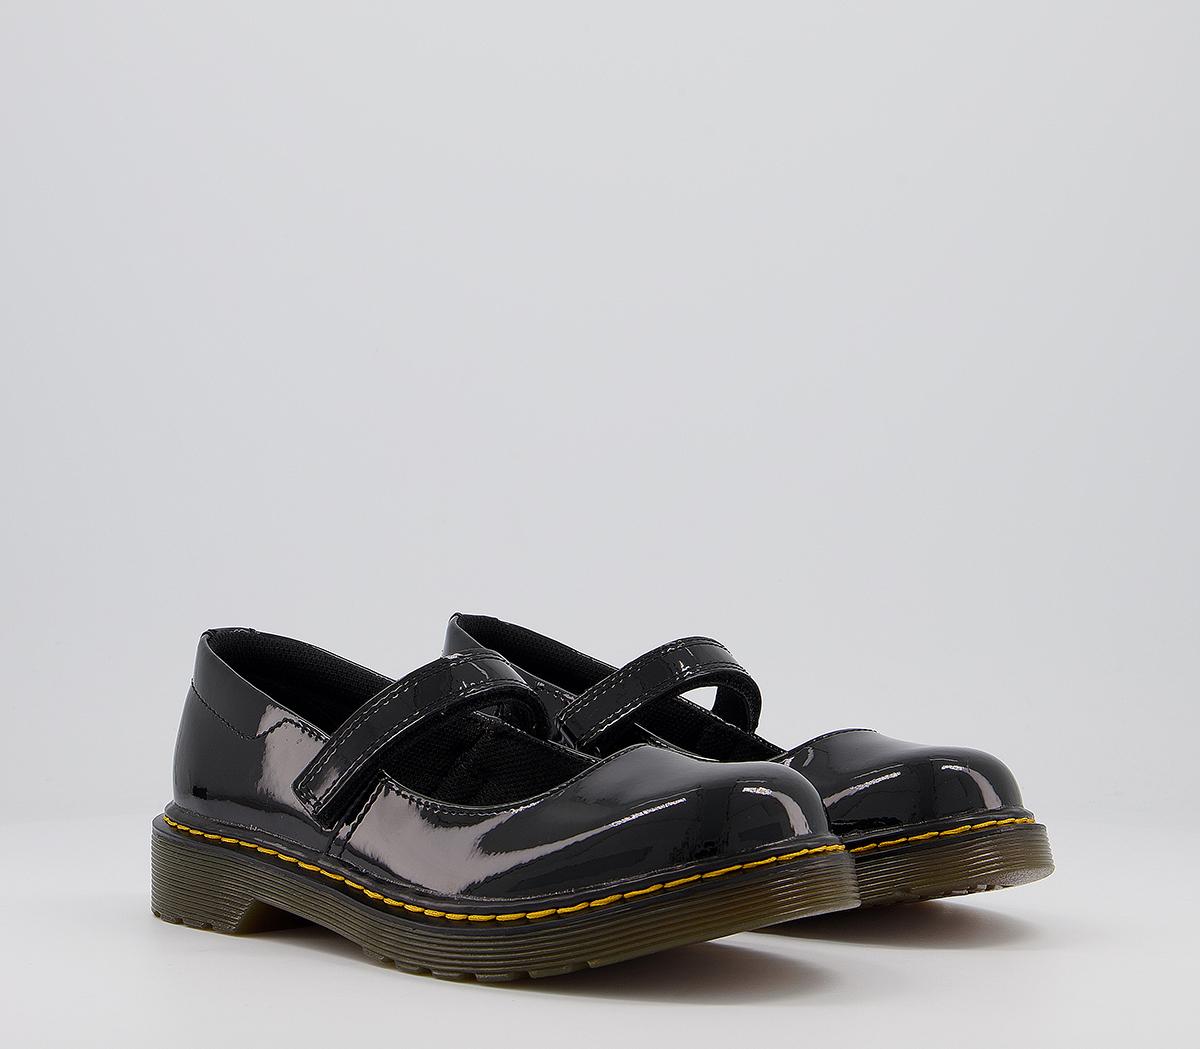 dr. martens kids maccy (jnr) black patent rubber, 10 youth